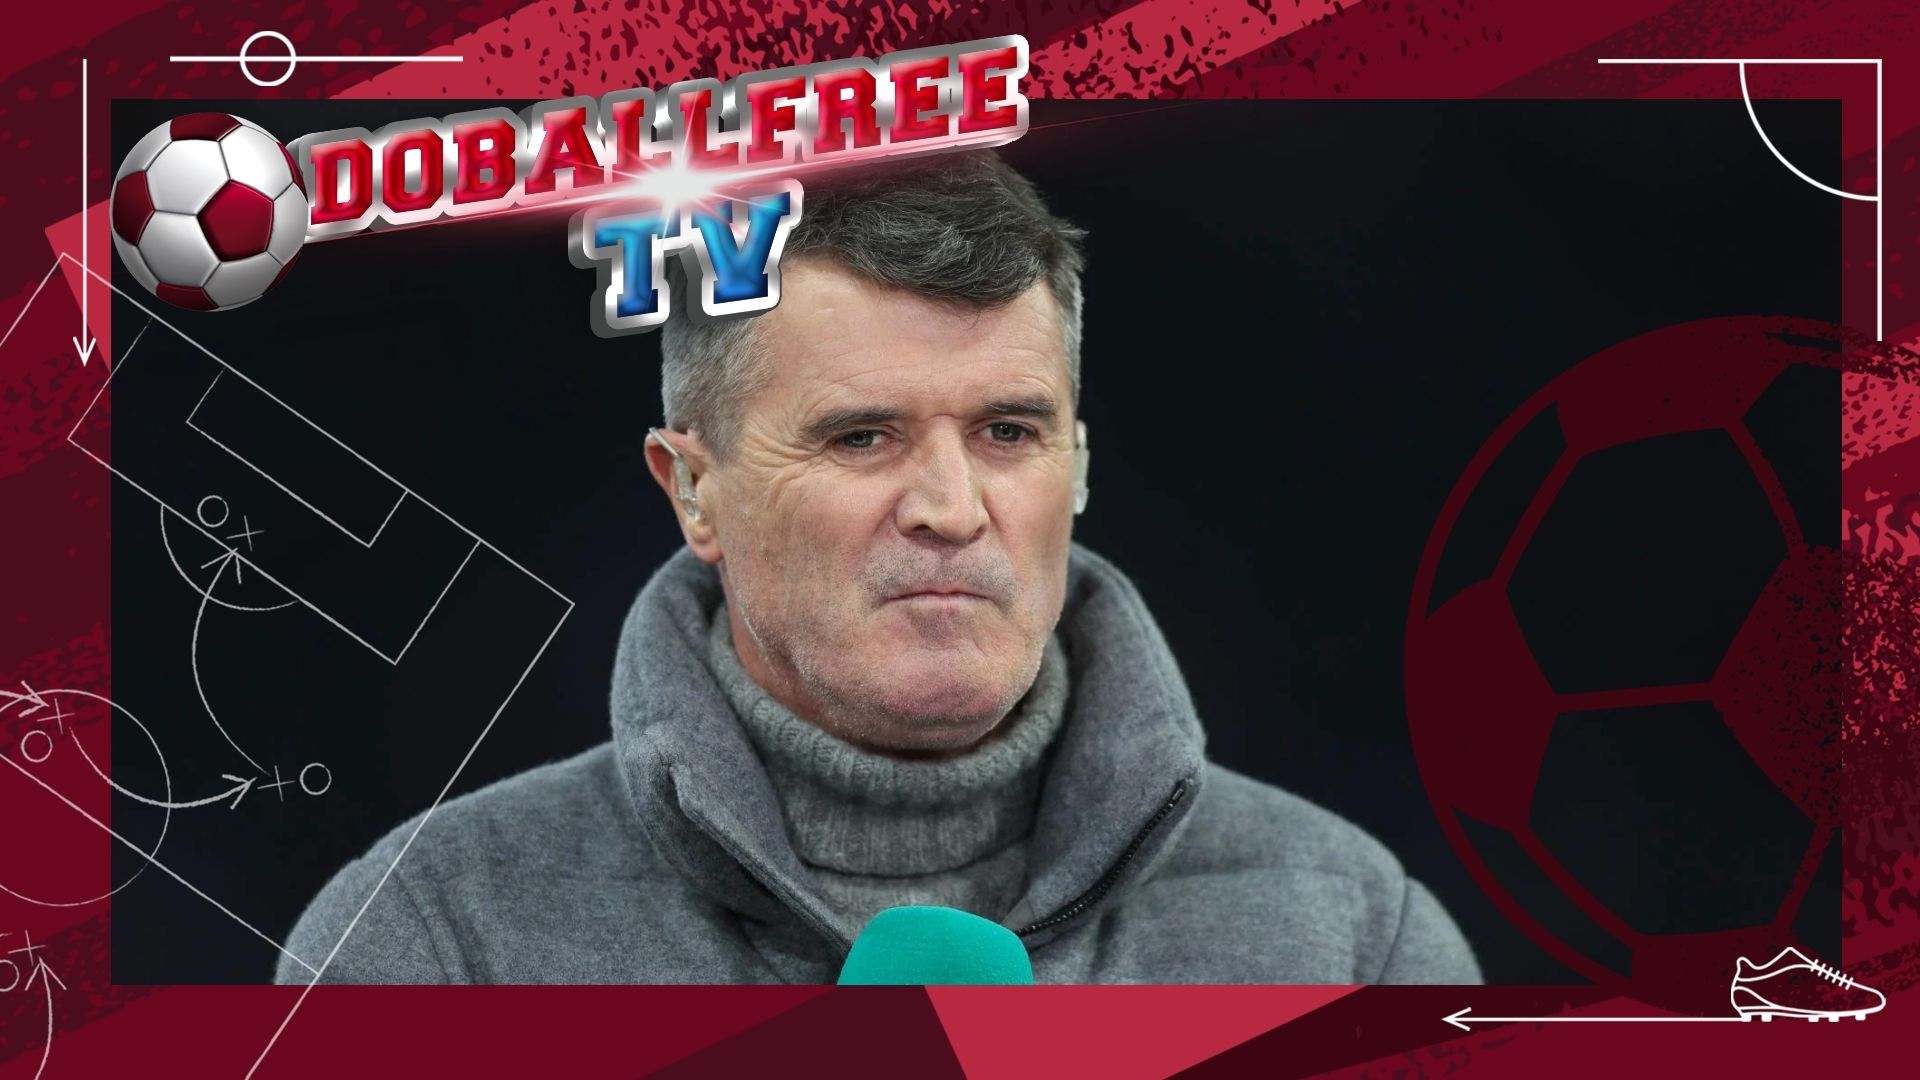 Roy Keane disagrees with Player of the Match award